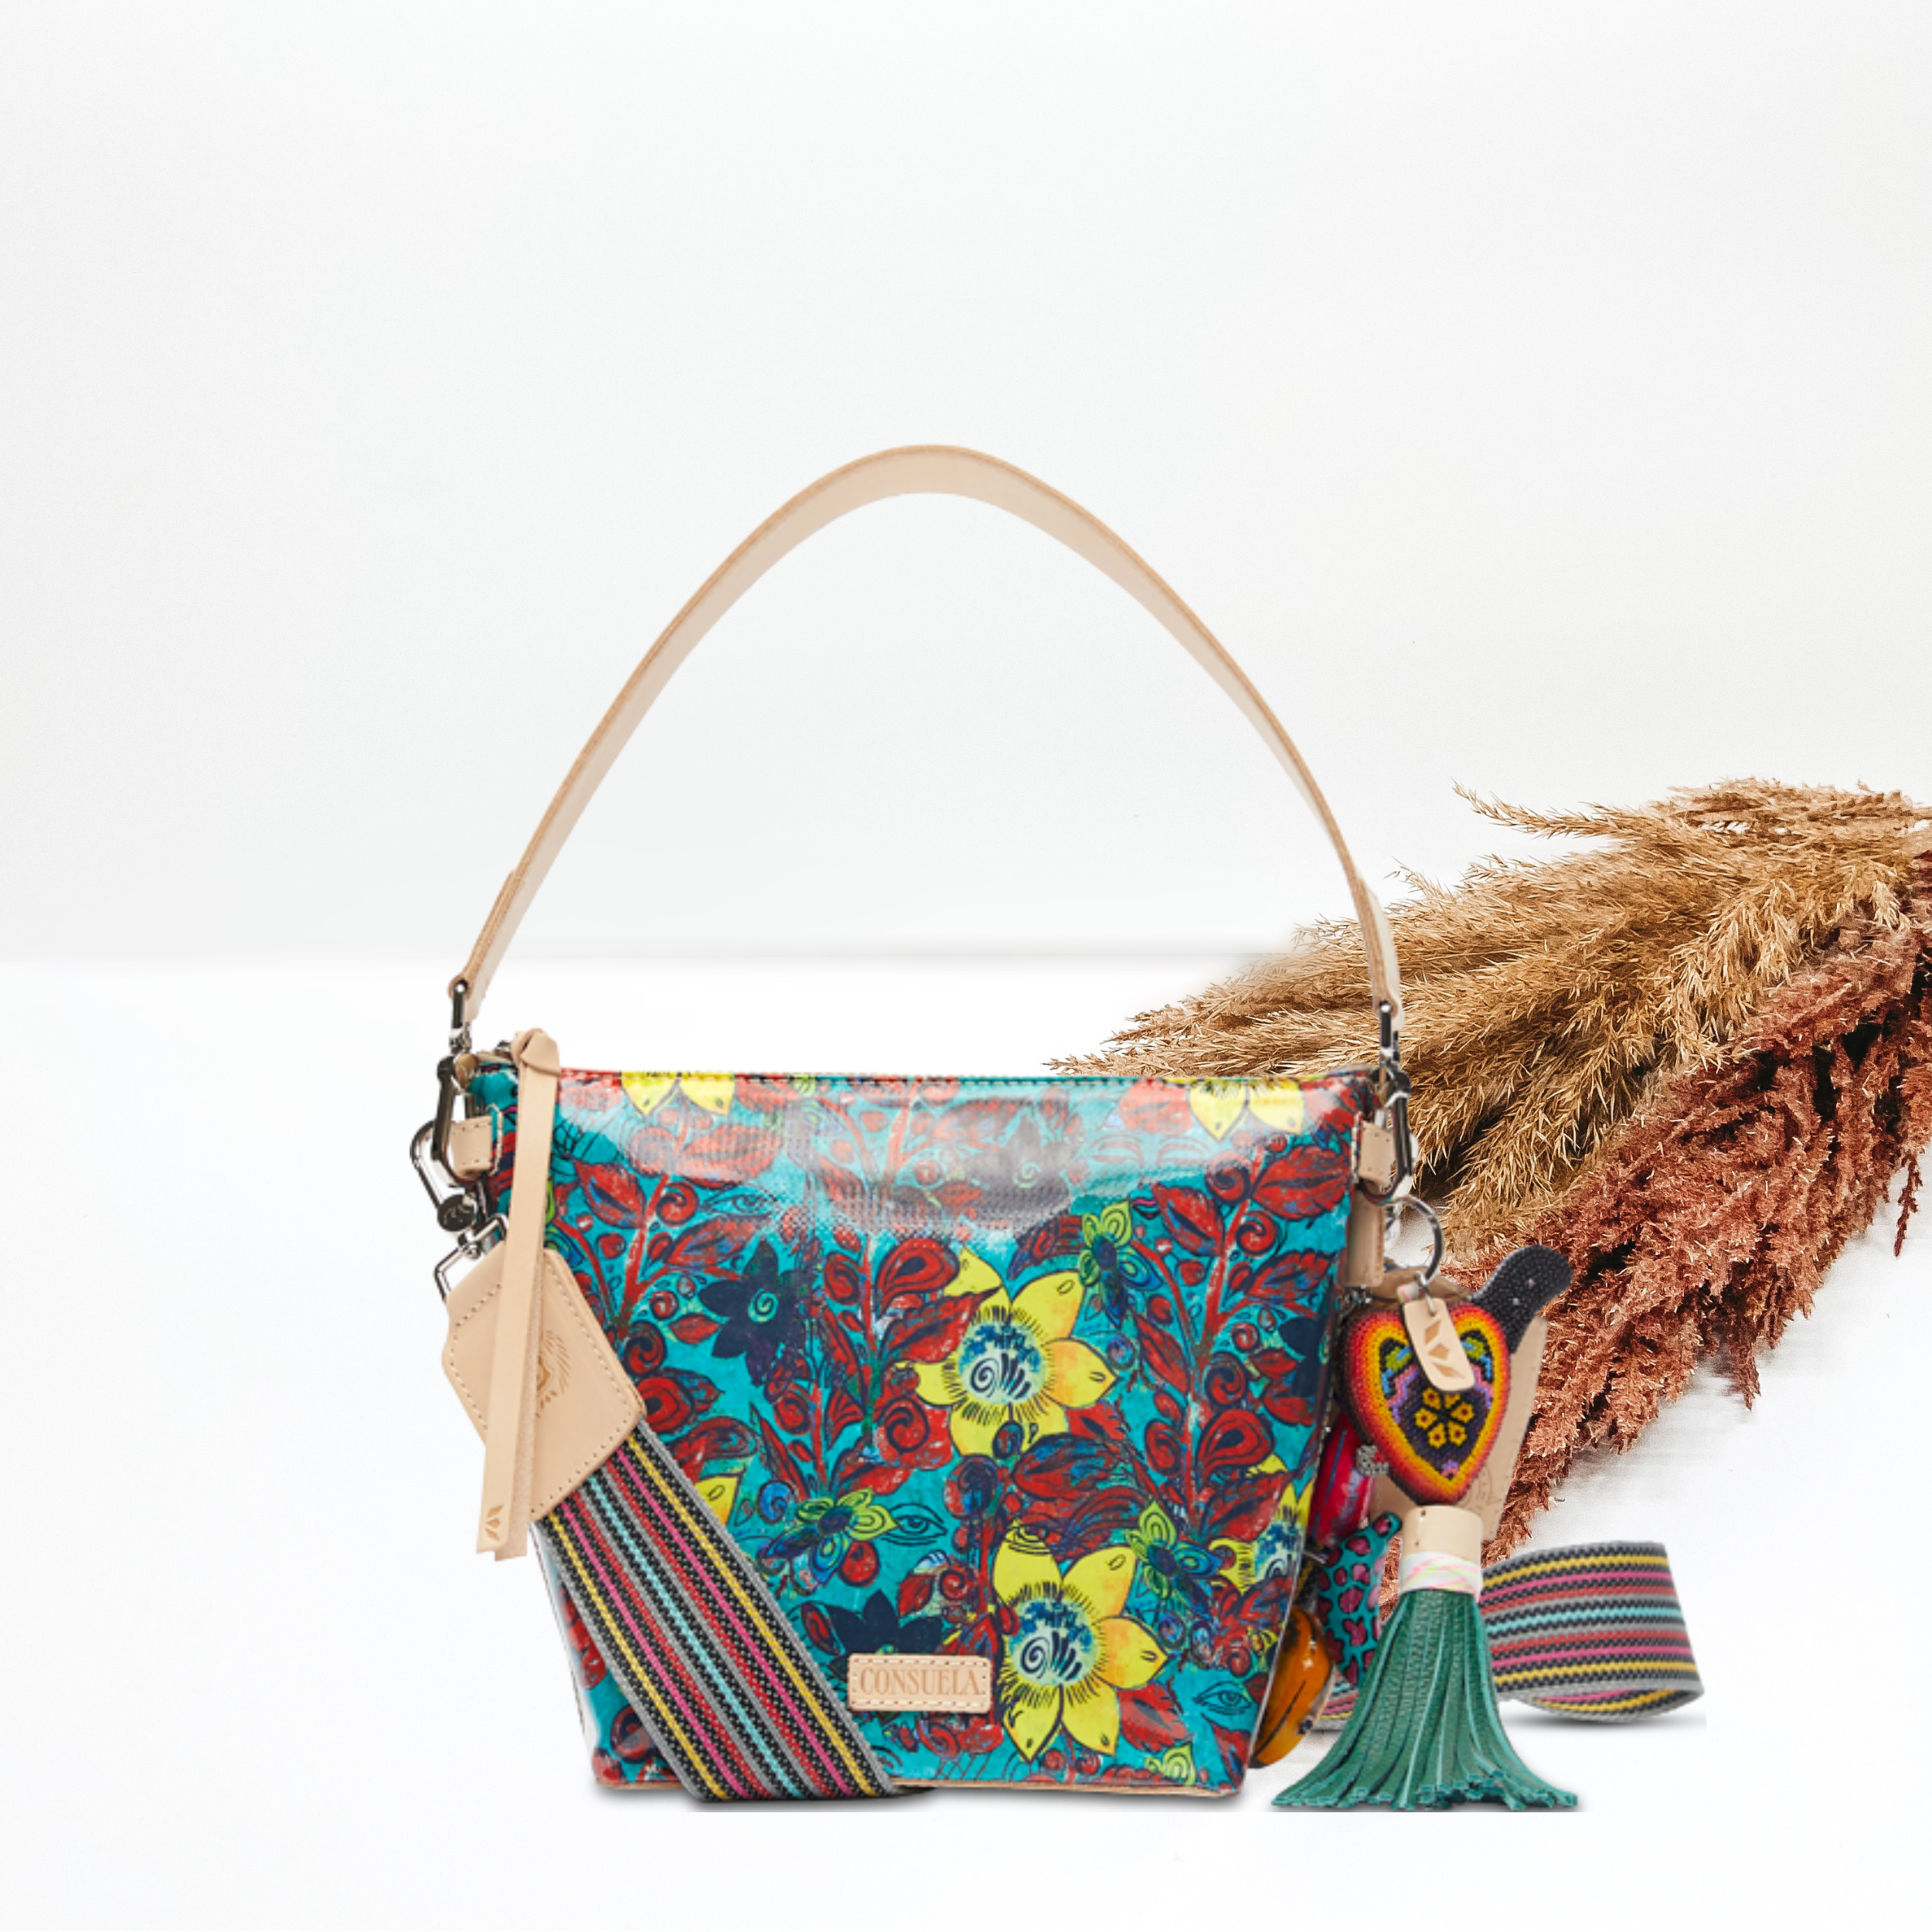 In the middle of the picture is a wedge bag in a blue, yellow, and red floral print. The background is solid white with pompas grass to the right of the bag.